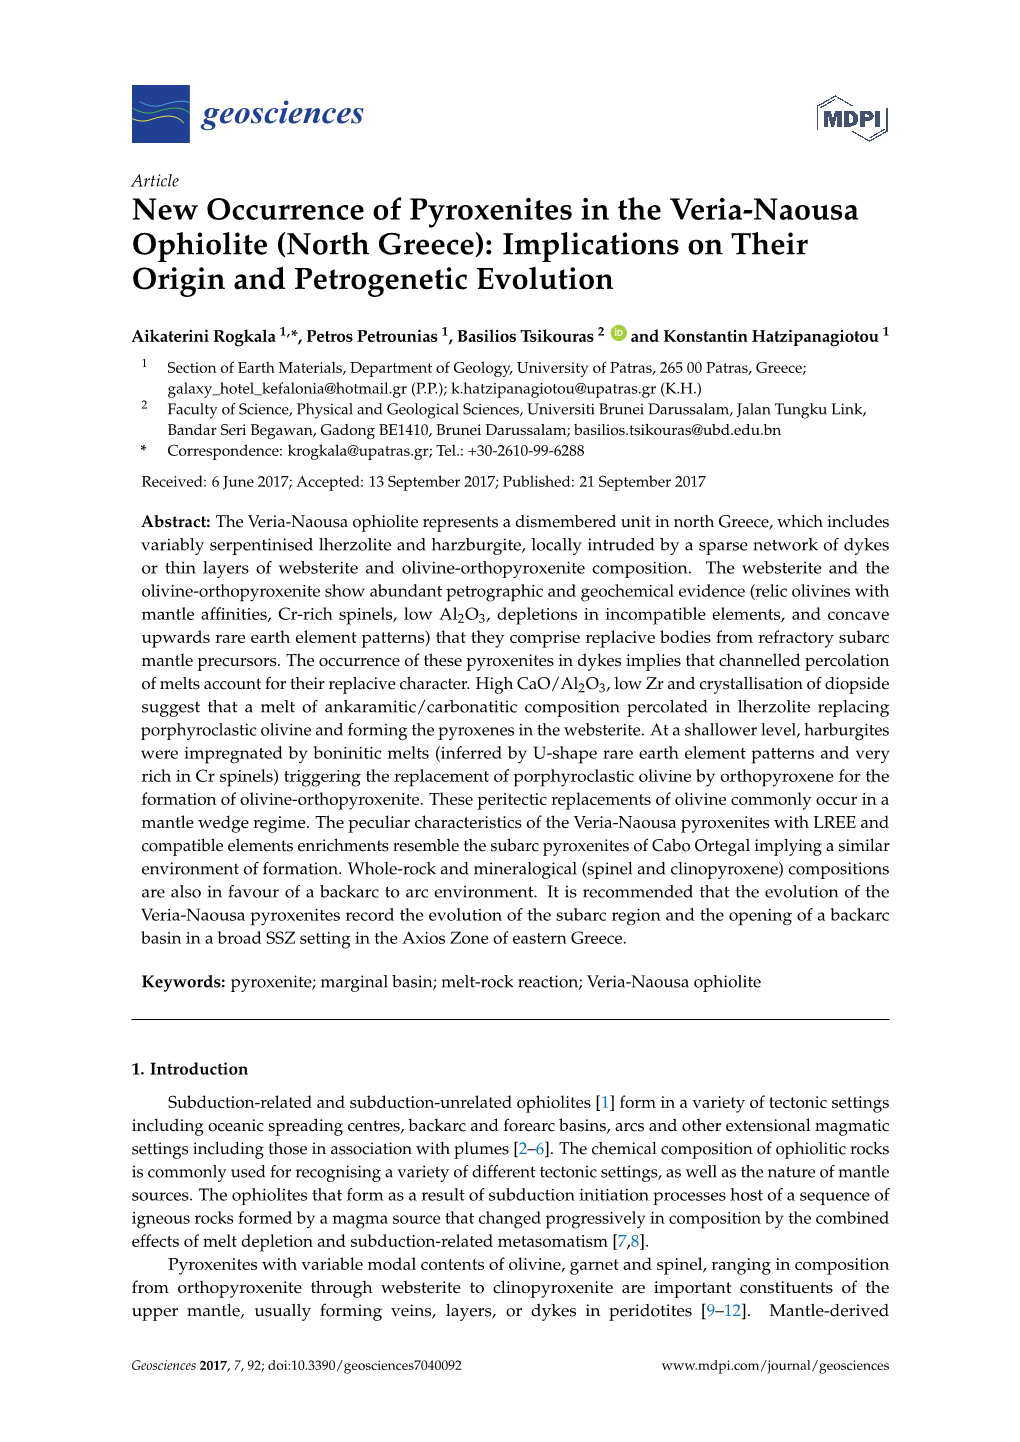 New Occurrence of Pyroxenites in the Veria-Naousa Ophiolite (North Greece): Implications on Their Origin and Petrogenetic Evolution